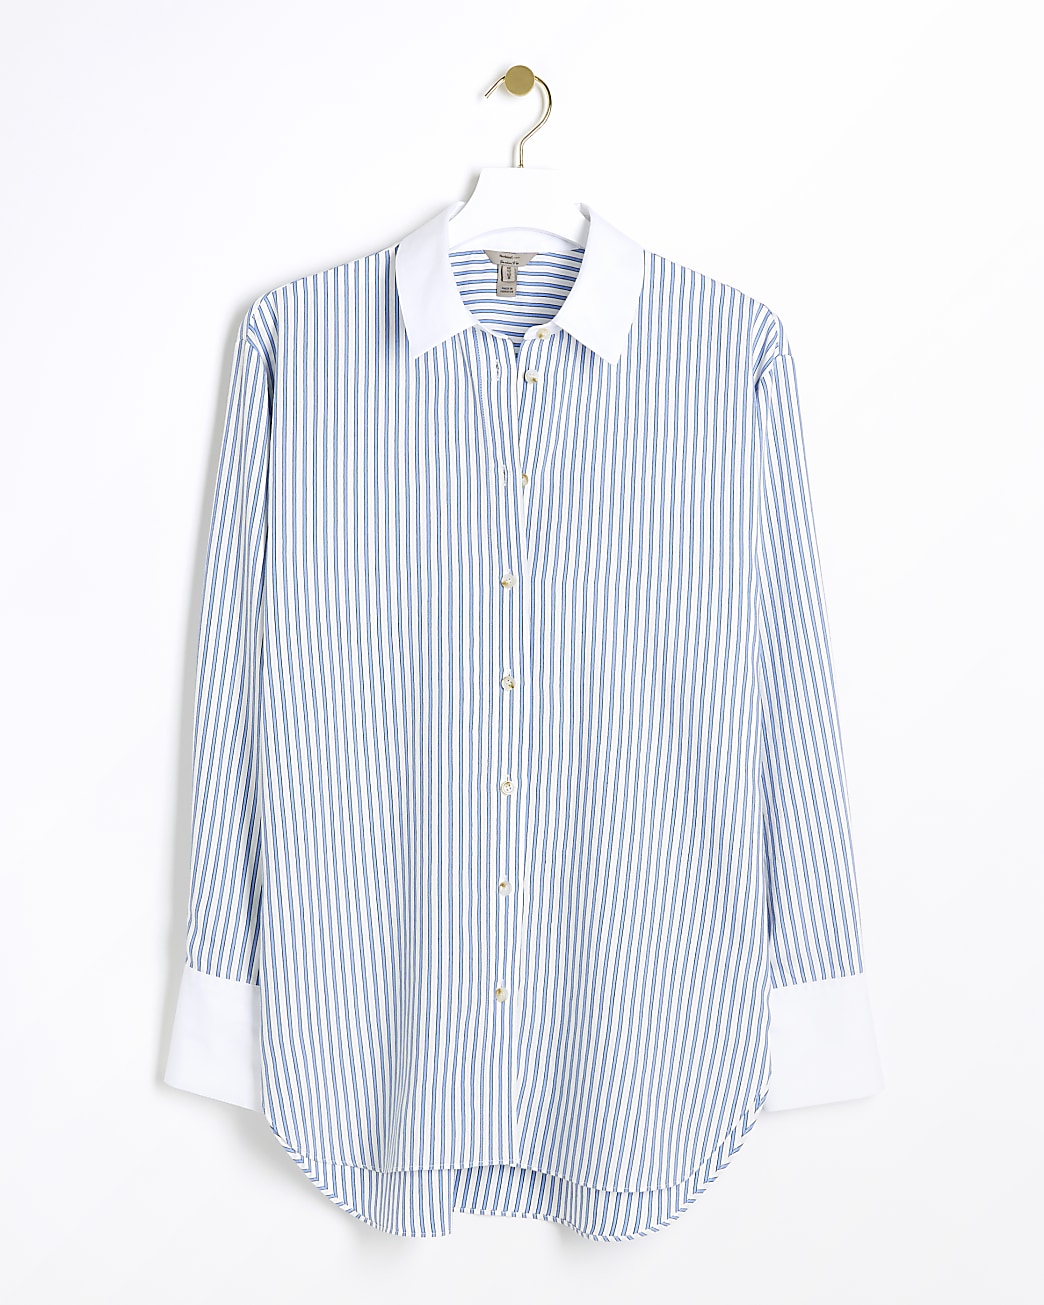 An oversized striped shirt from River Island hanging on a gold-toned hanger against a white background. The shirt has vertical blue and white stripes with a crisp white collar and cuffs for a classic contrast. It features a full button placket with golden buttons, a curved hem, and long sleeves, combining a timeless pattern with a modern, relaxed silhouette.